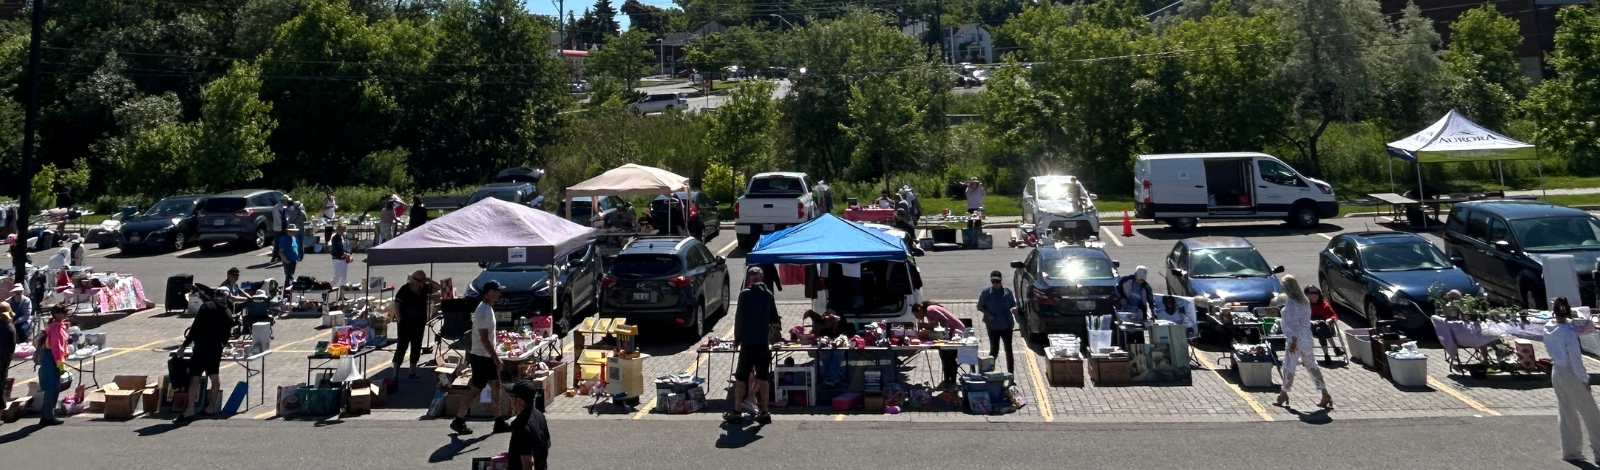 Image of Community Garage Sale Event with people selling items